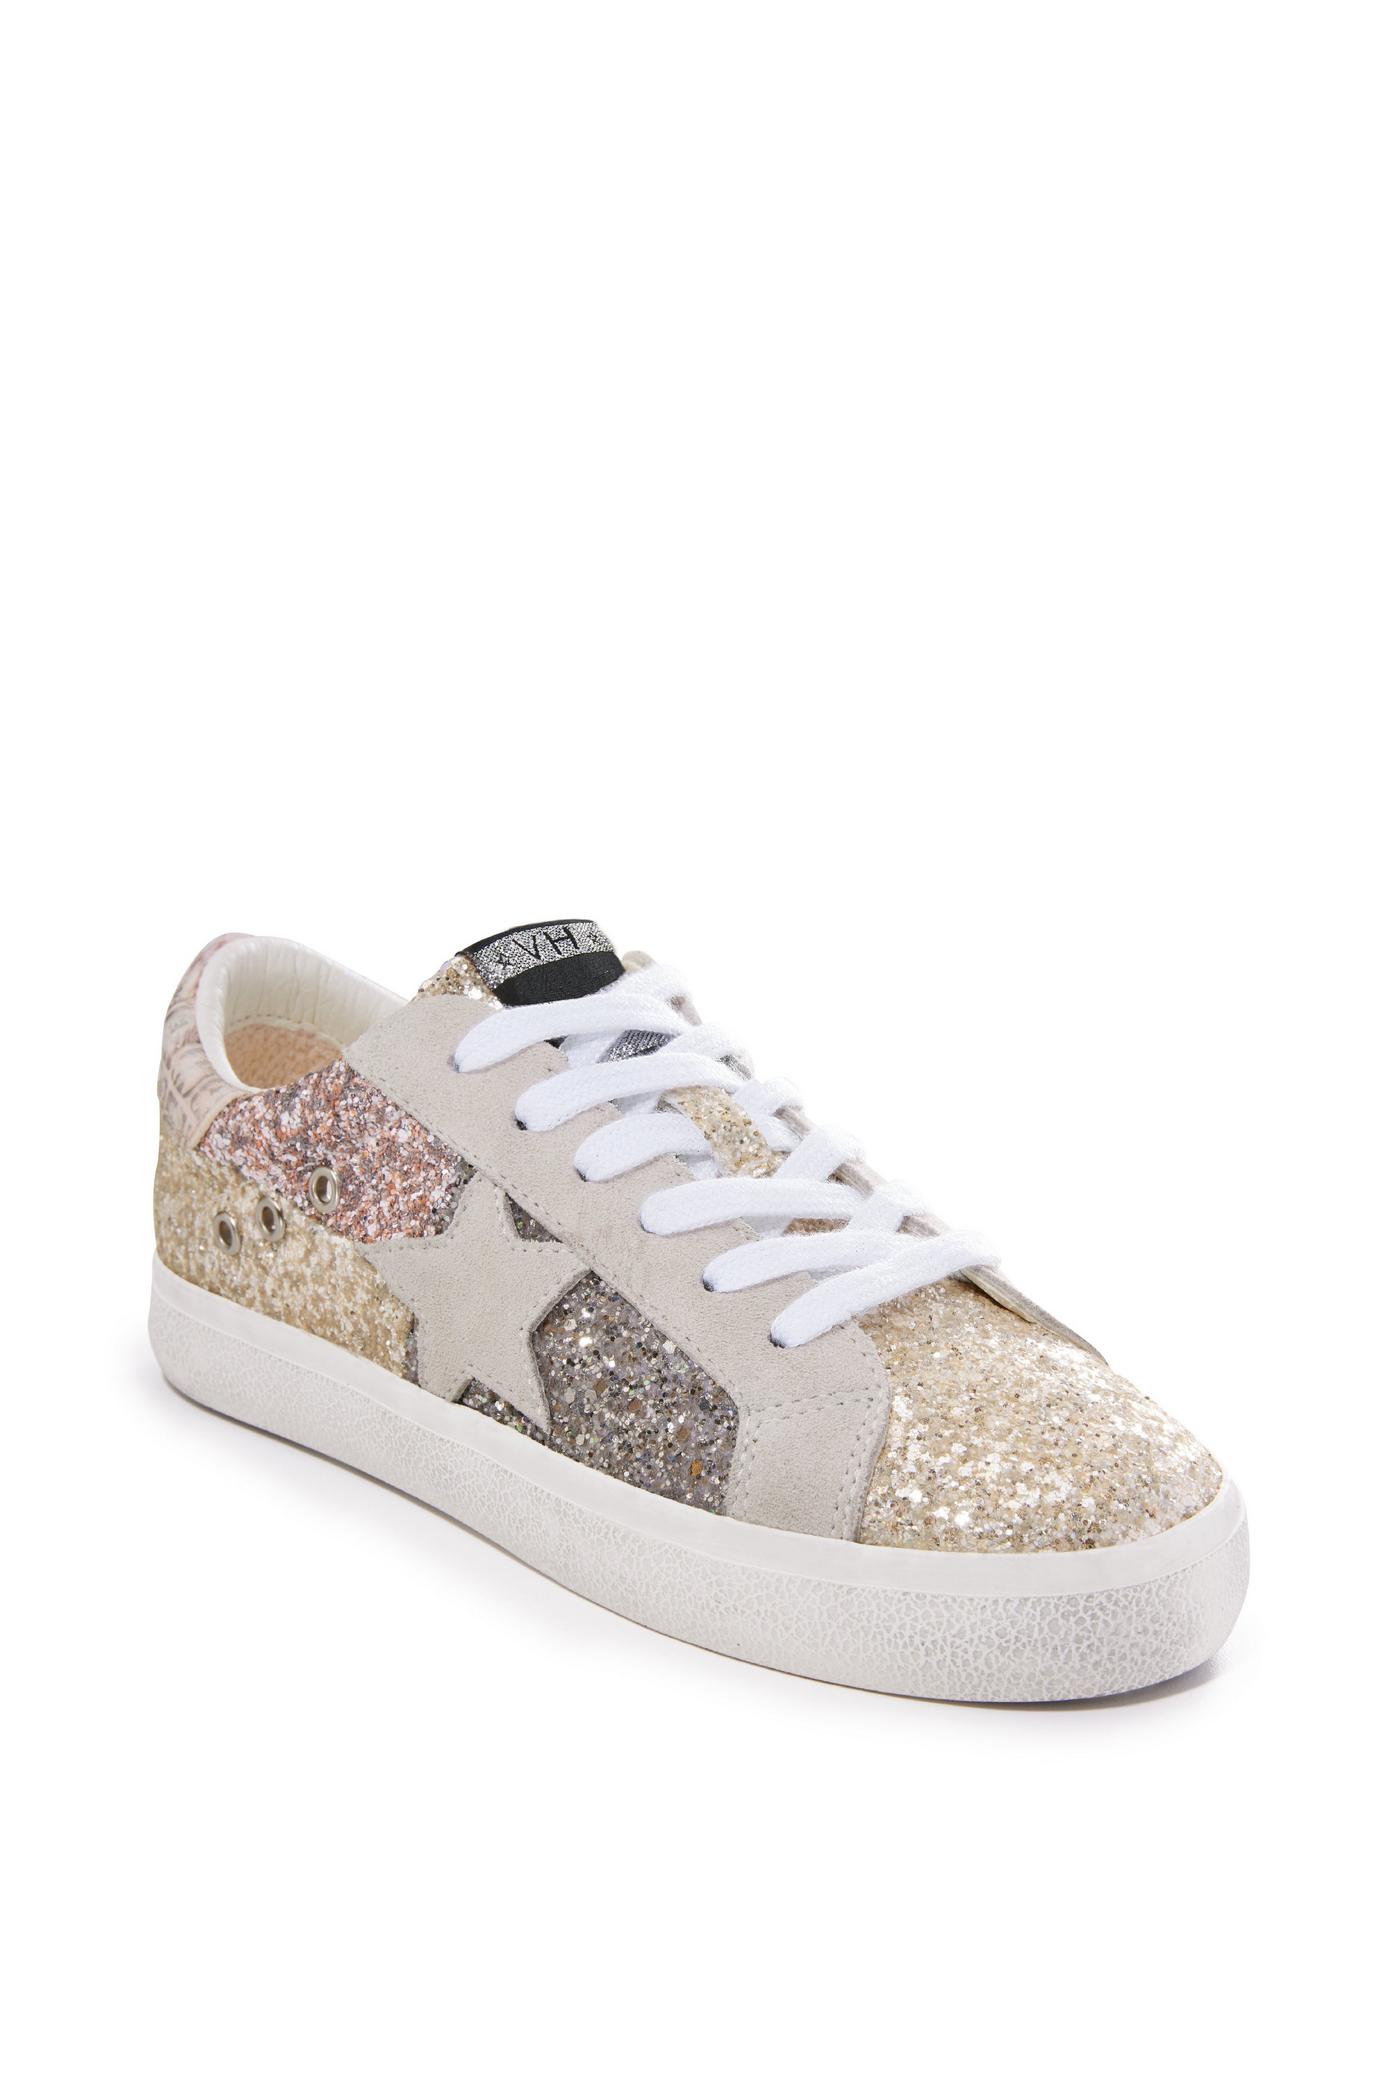  LUCKY STEP Glitter Sneakers Lace up, Fashion Sneakers, Sparkly Shoes for Women (All Gold,6 B(M) US)